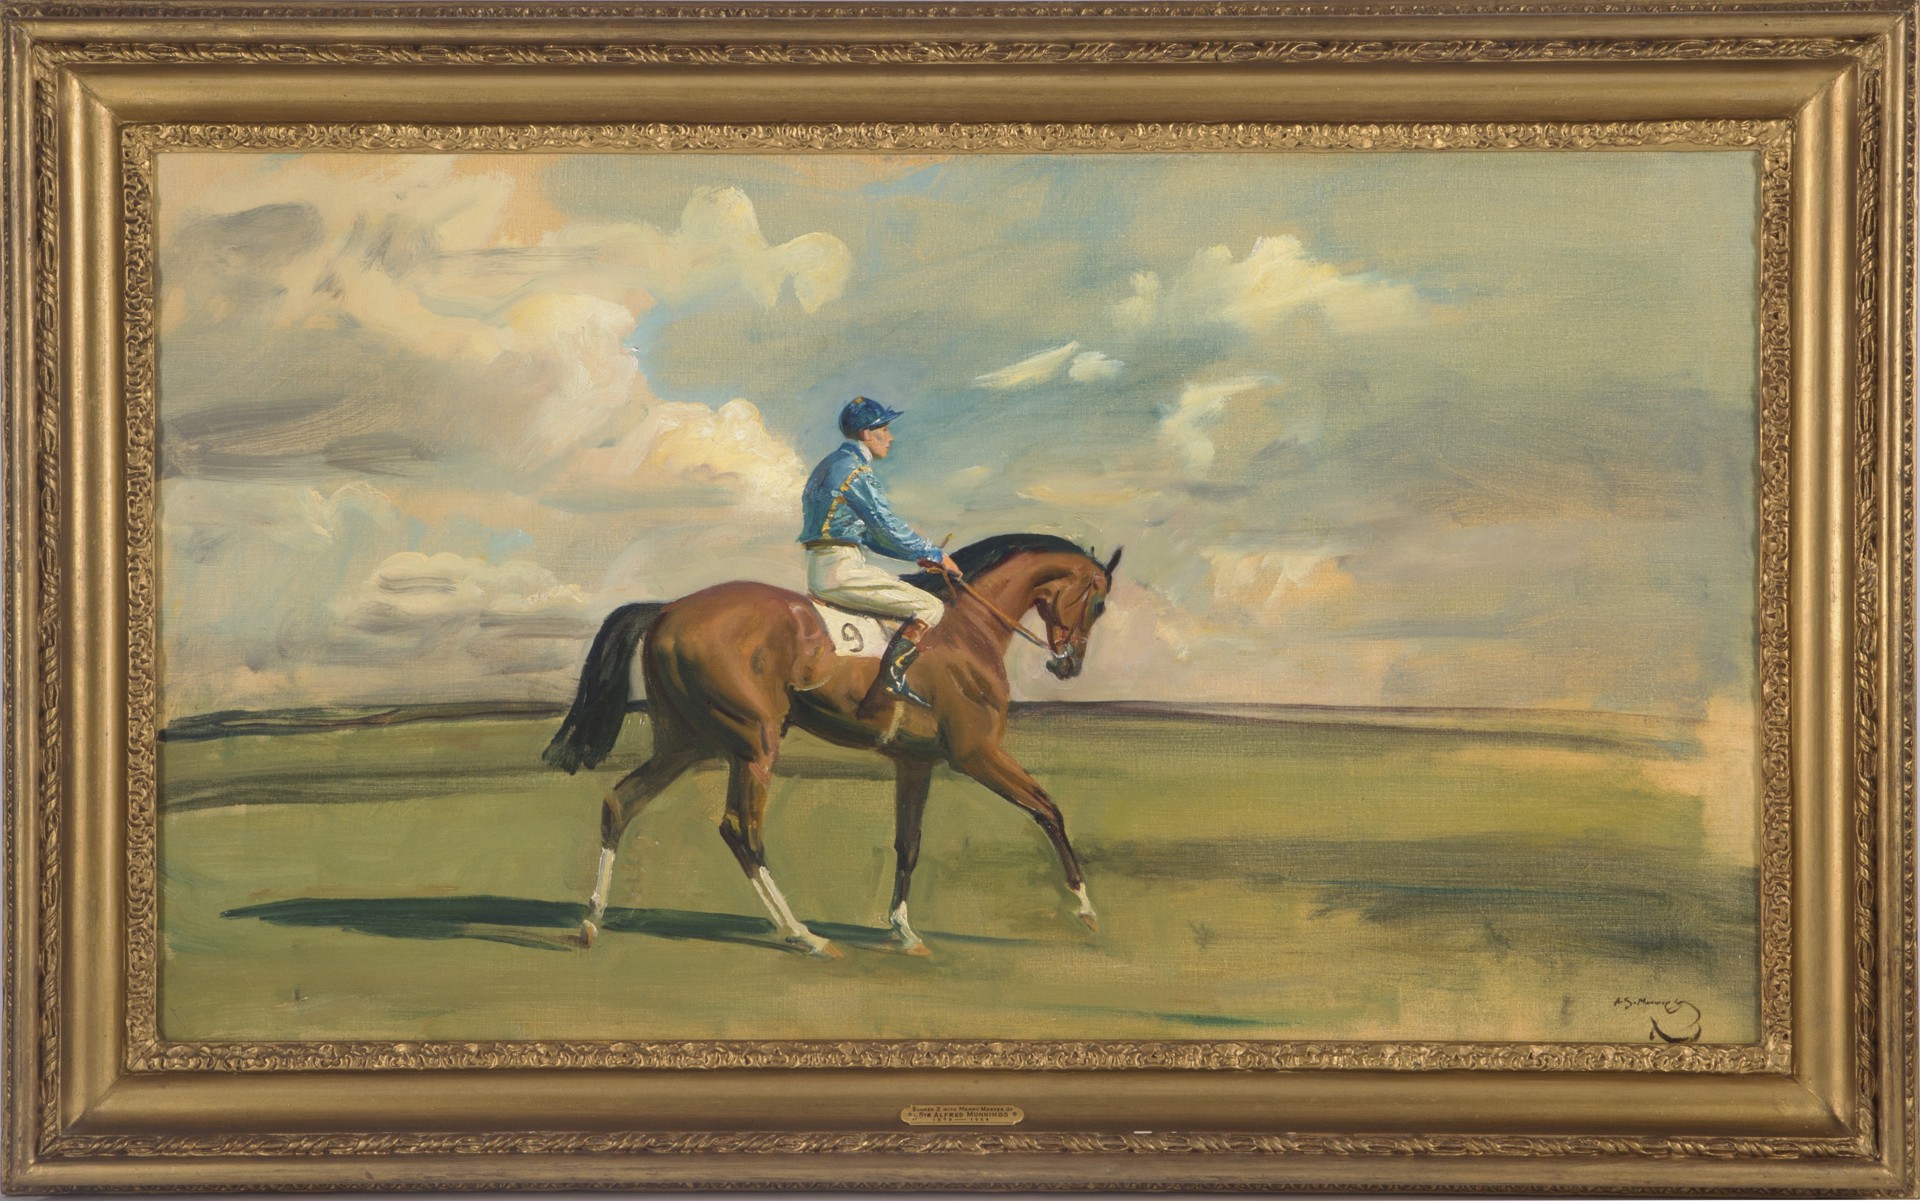 Bunker II, with Manny Mercer up in the Colors of Sir Adrian Jarvis, Bt. by Sir Alfred James Munnings